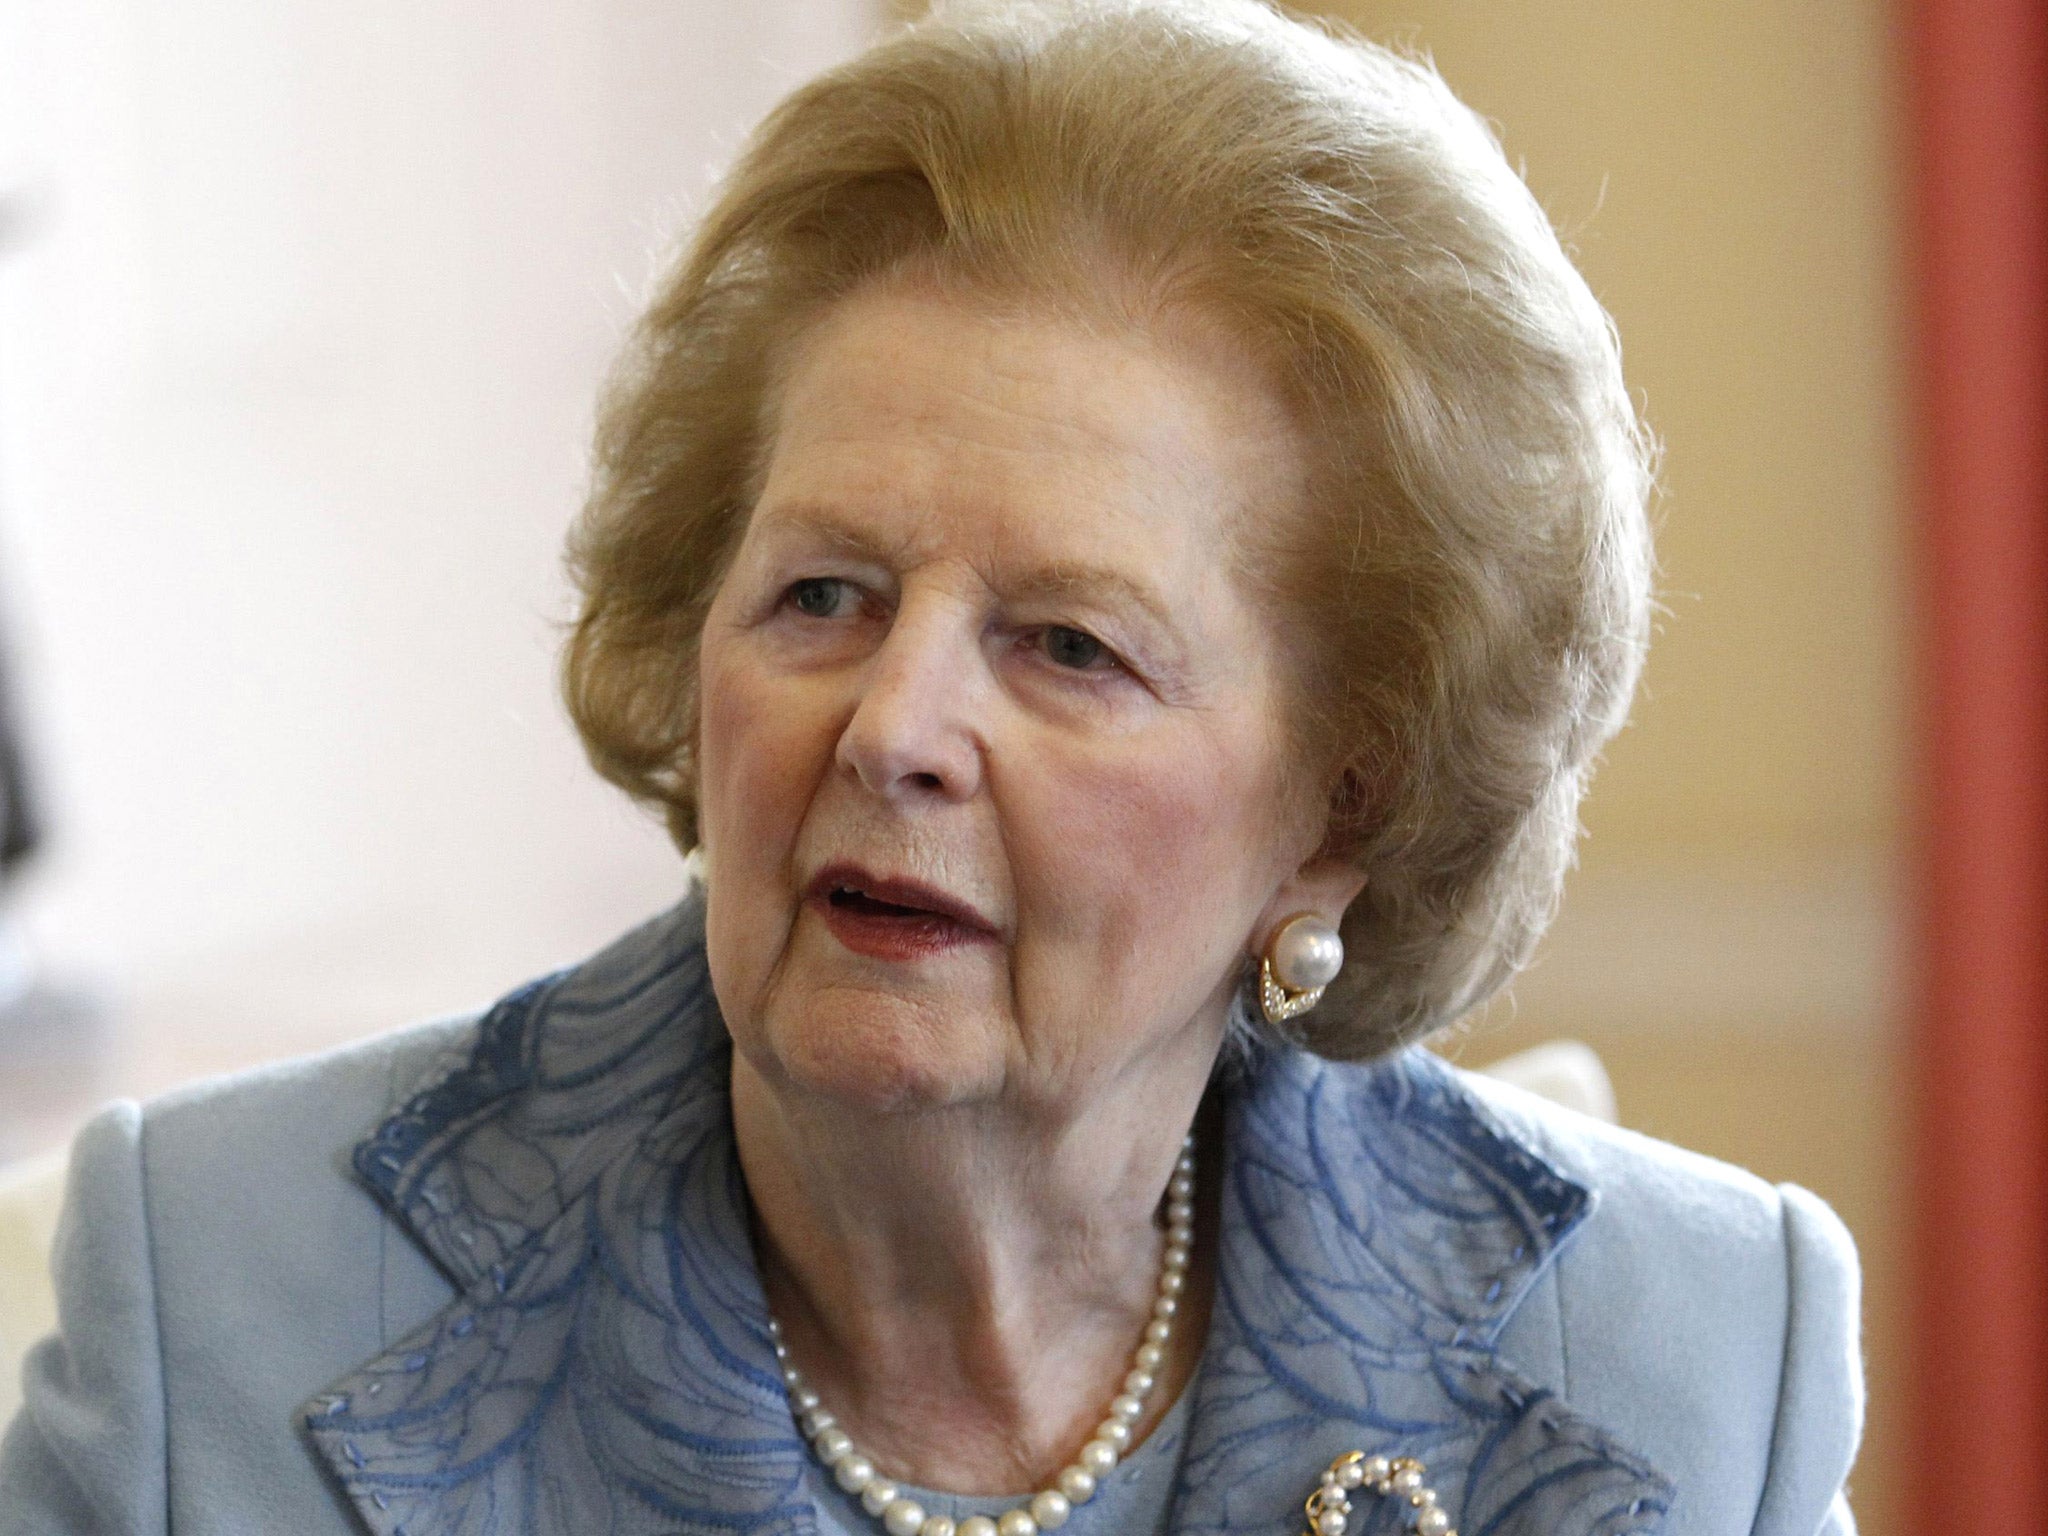 Baroness Thatcher died on April 8th